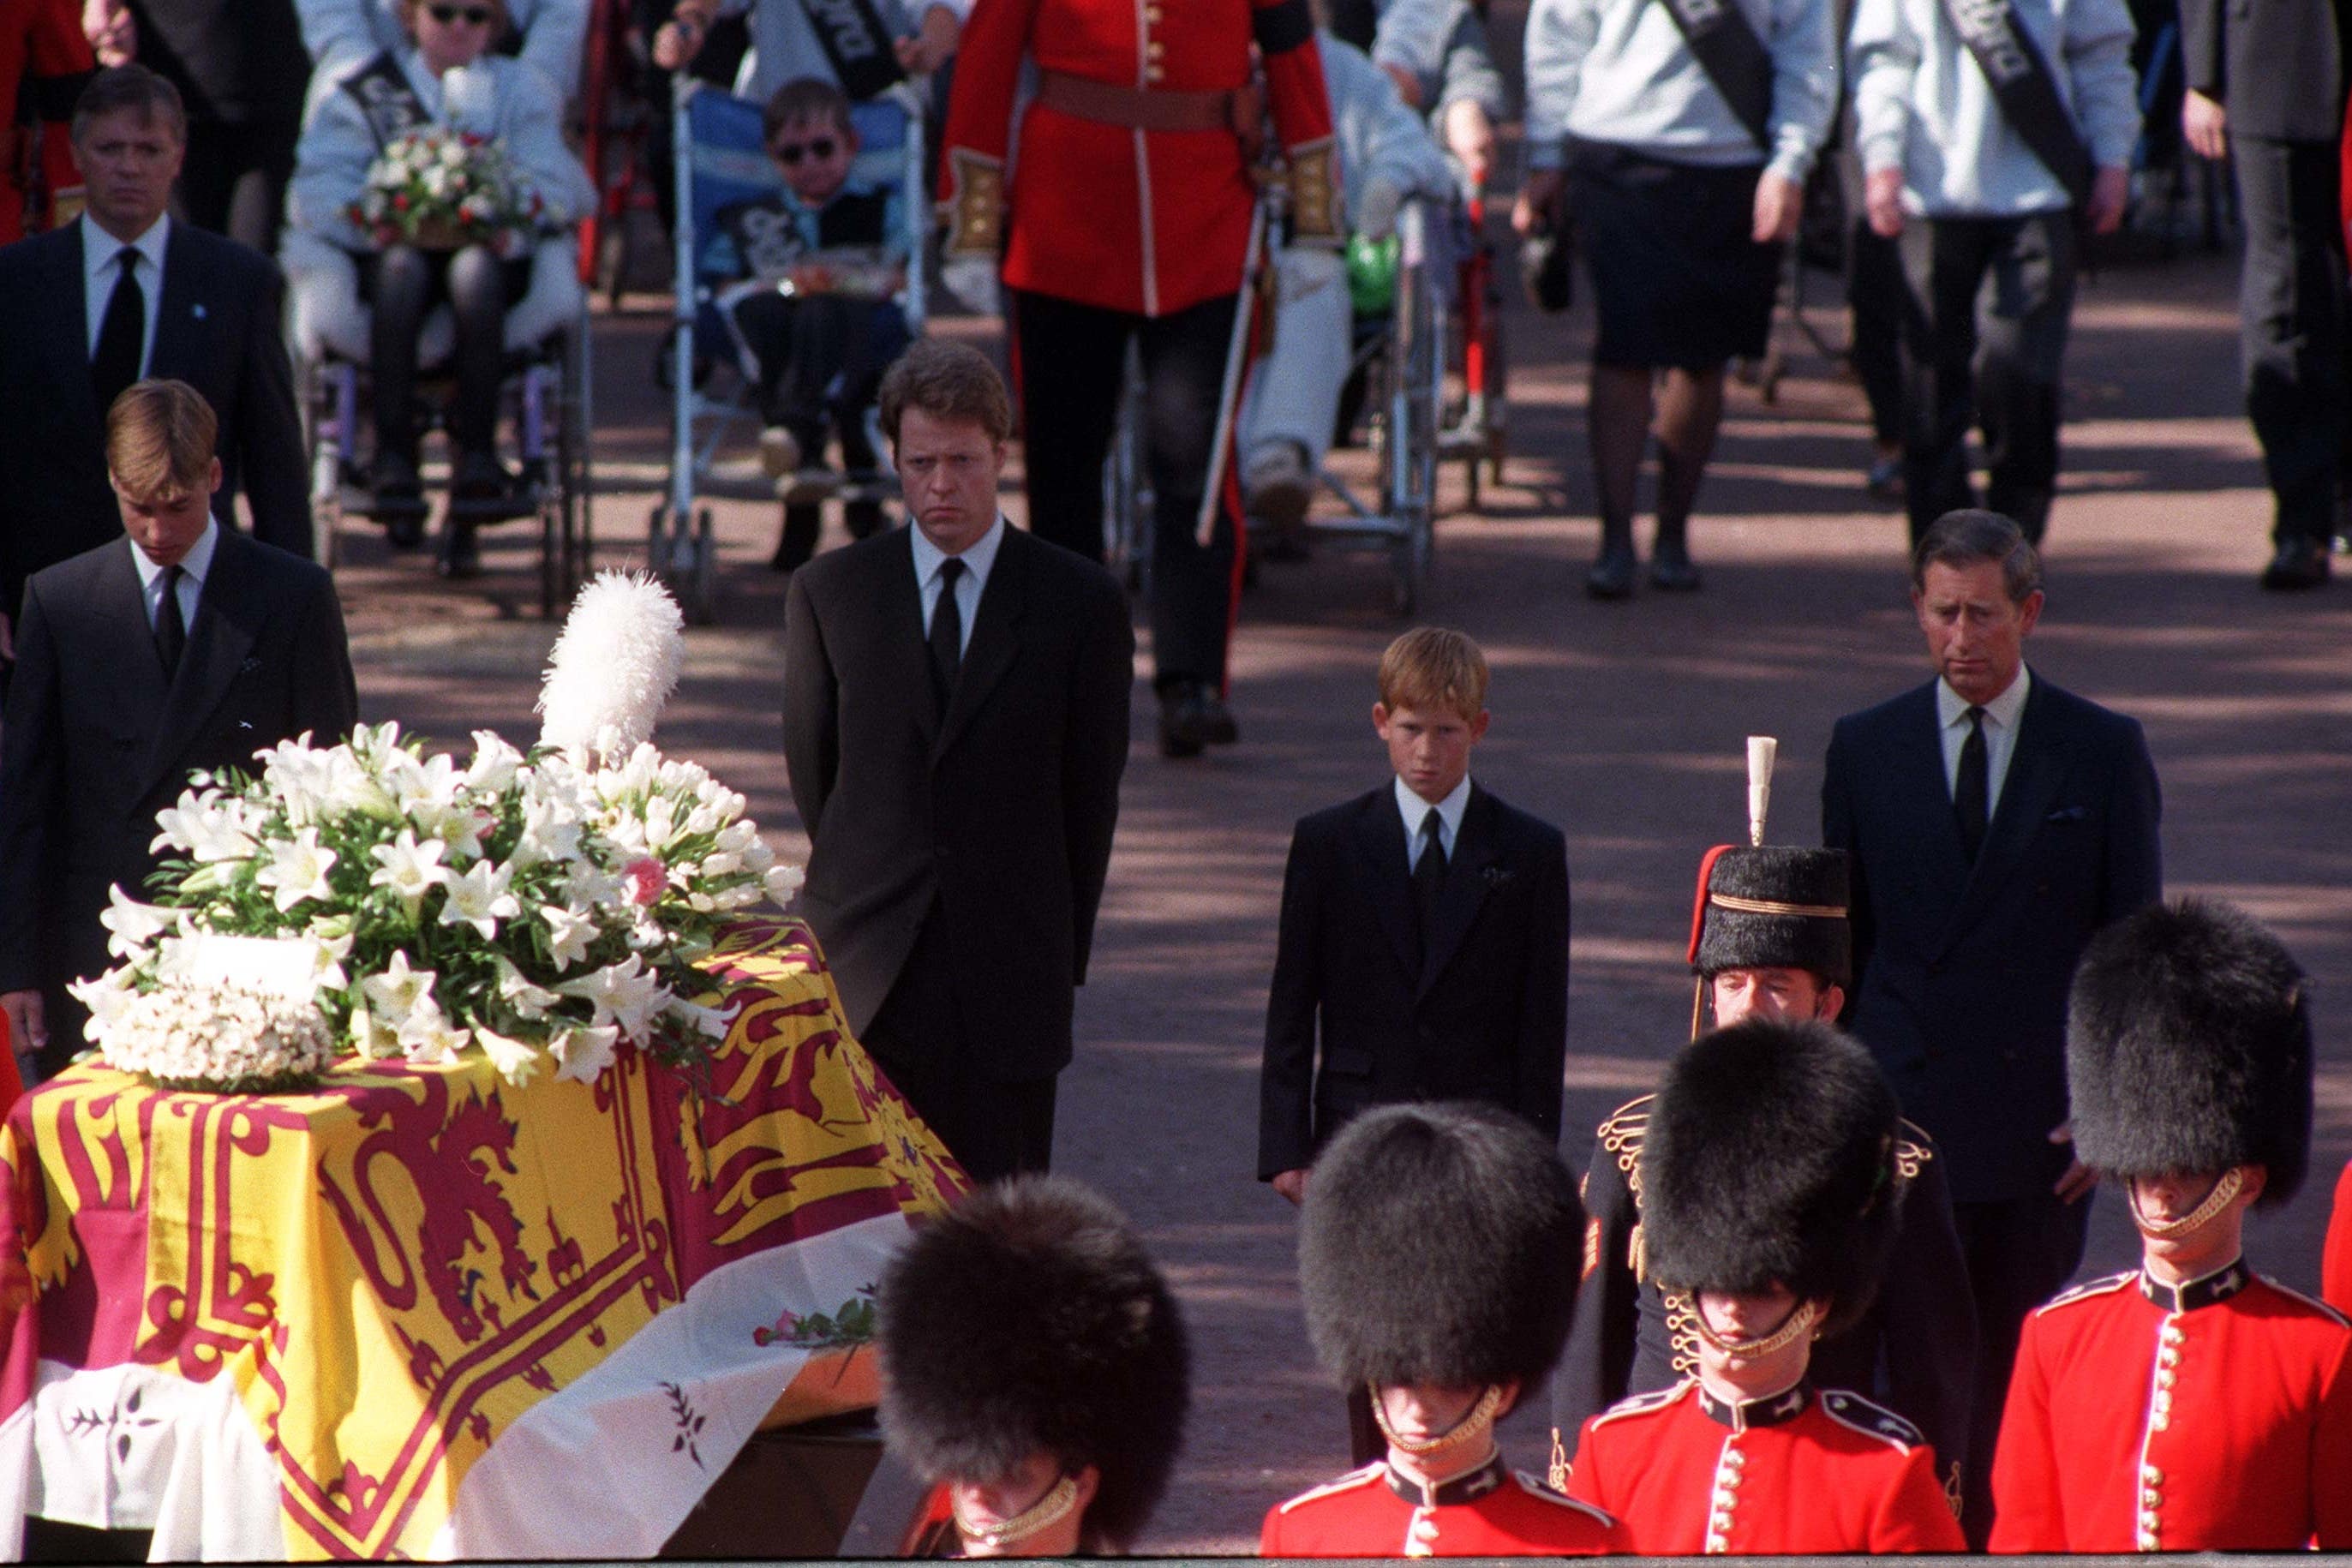 Princes William and Harry, the sons of Diana, Princess of Wales, her brother Earl Spencer and her former husband, the Prince of Wales, walking behind her coffin as the funeral procession approaches Westminster Abbey (Adam Butler/PA)